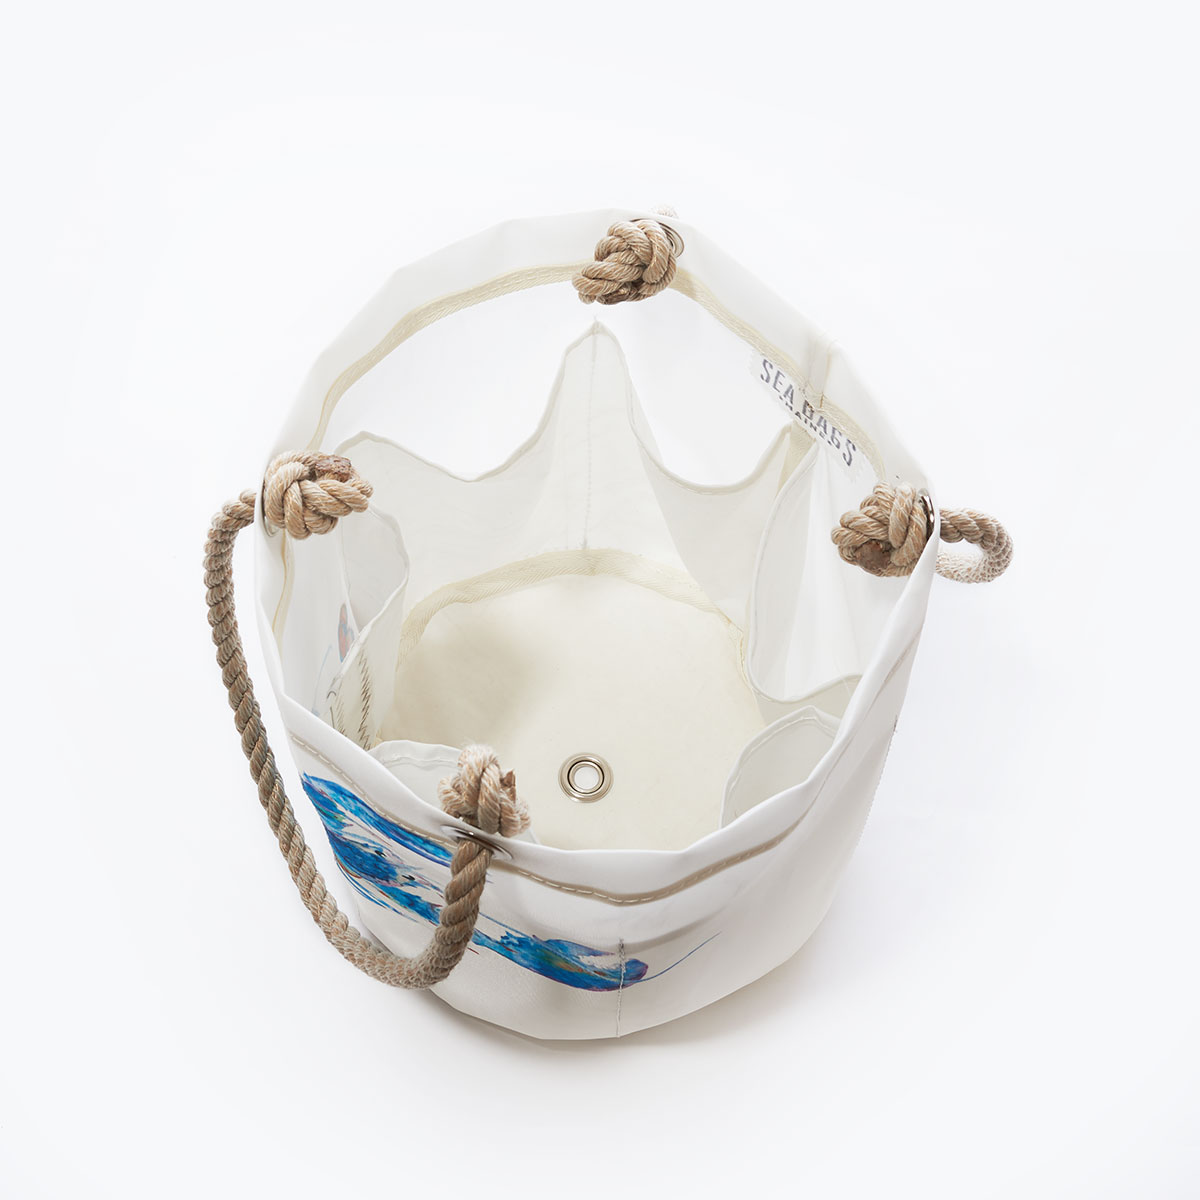 inside view showing six bottle pockets of a white recycled sail cloth beverage bucket with hemp rope handles and printed with a watercolor lobster in shades of blue